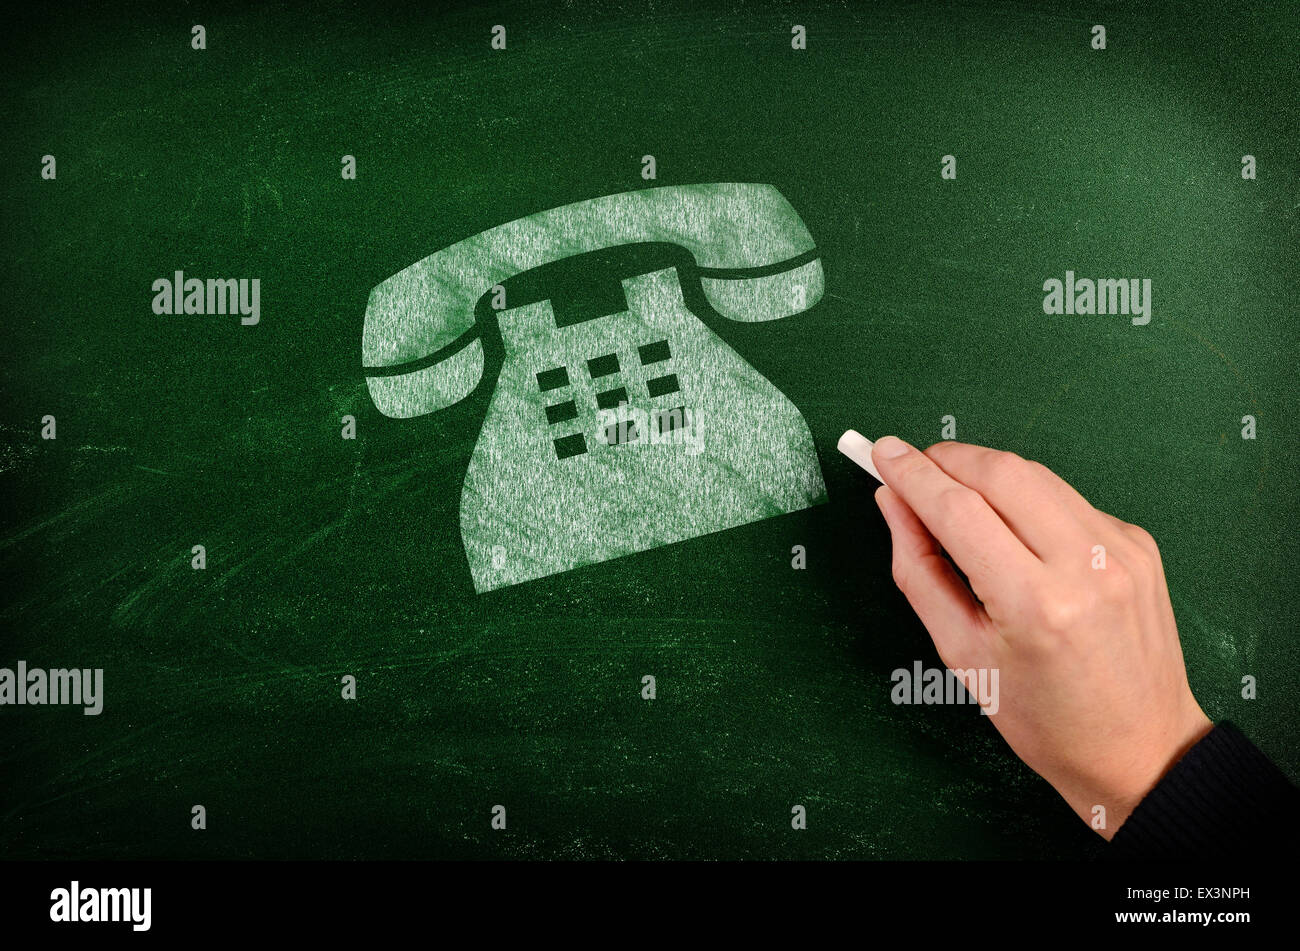 Old phone symbol drawn with chalk on green chalkboard Stock Photo